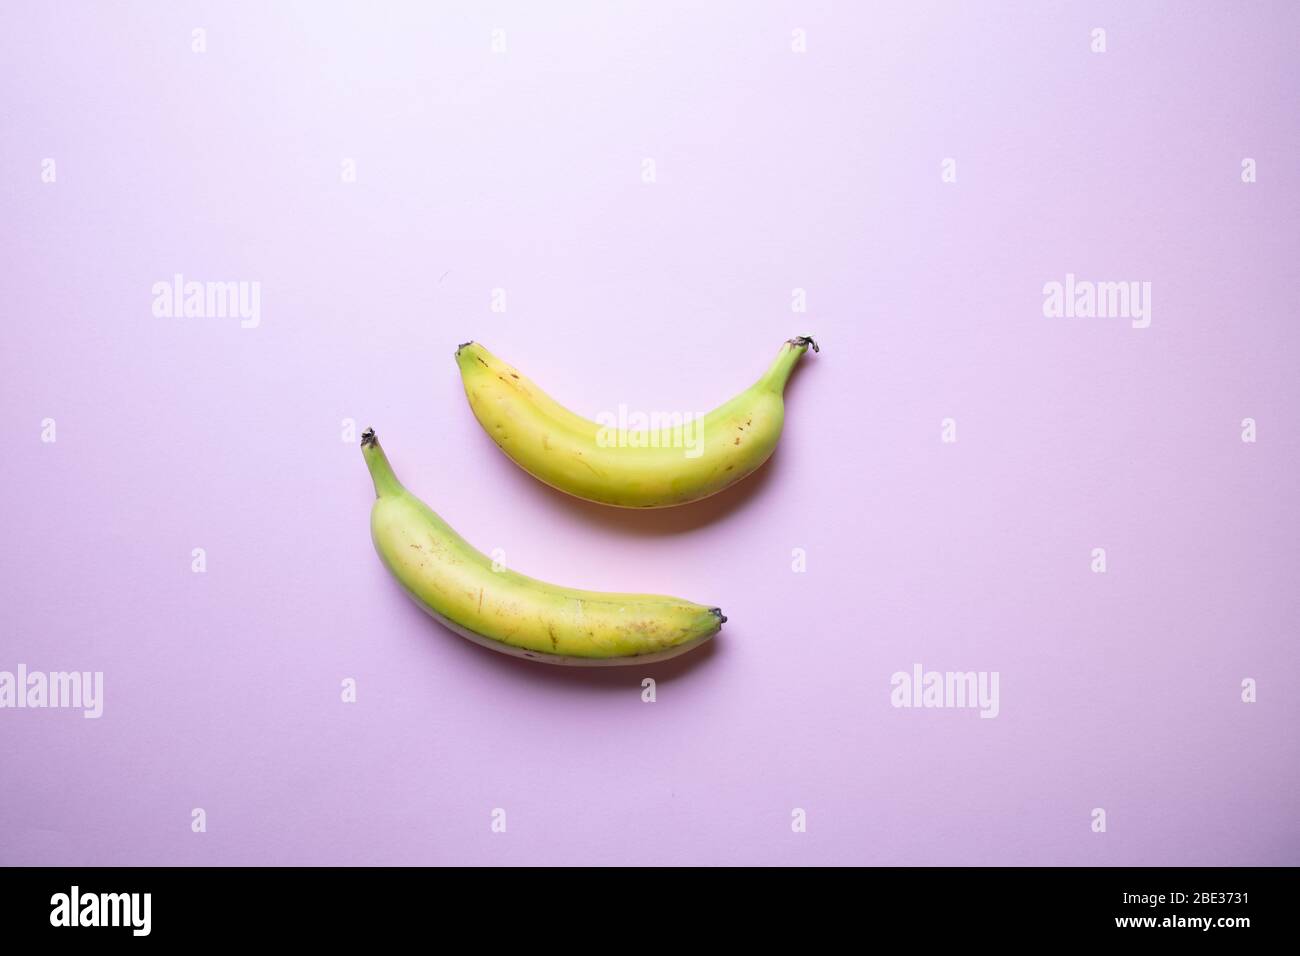 a stylish pastel coloured image of two bananas an a pink background, flat lay, top view Stock Photo